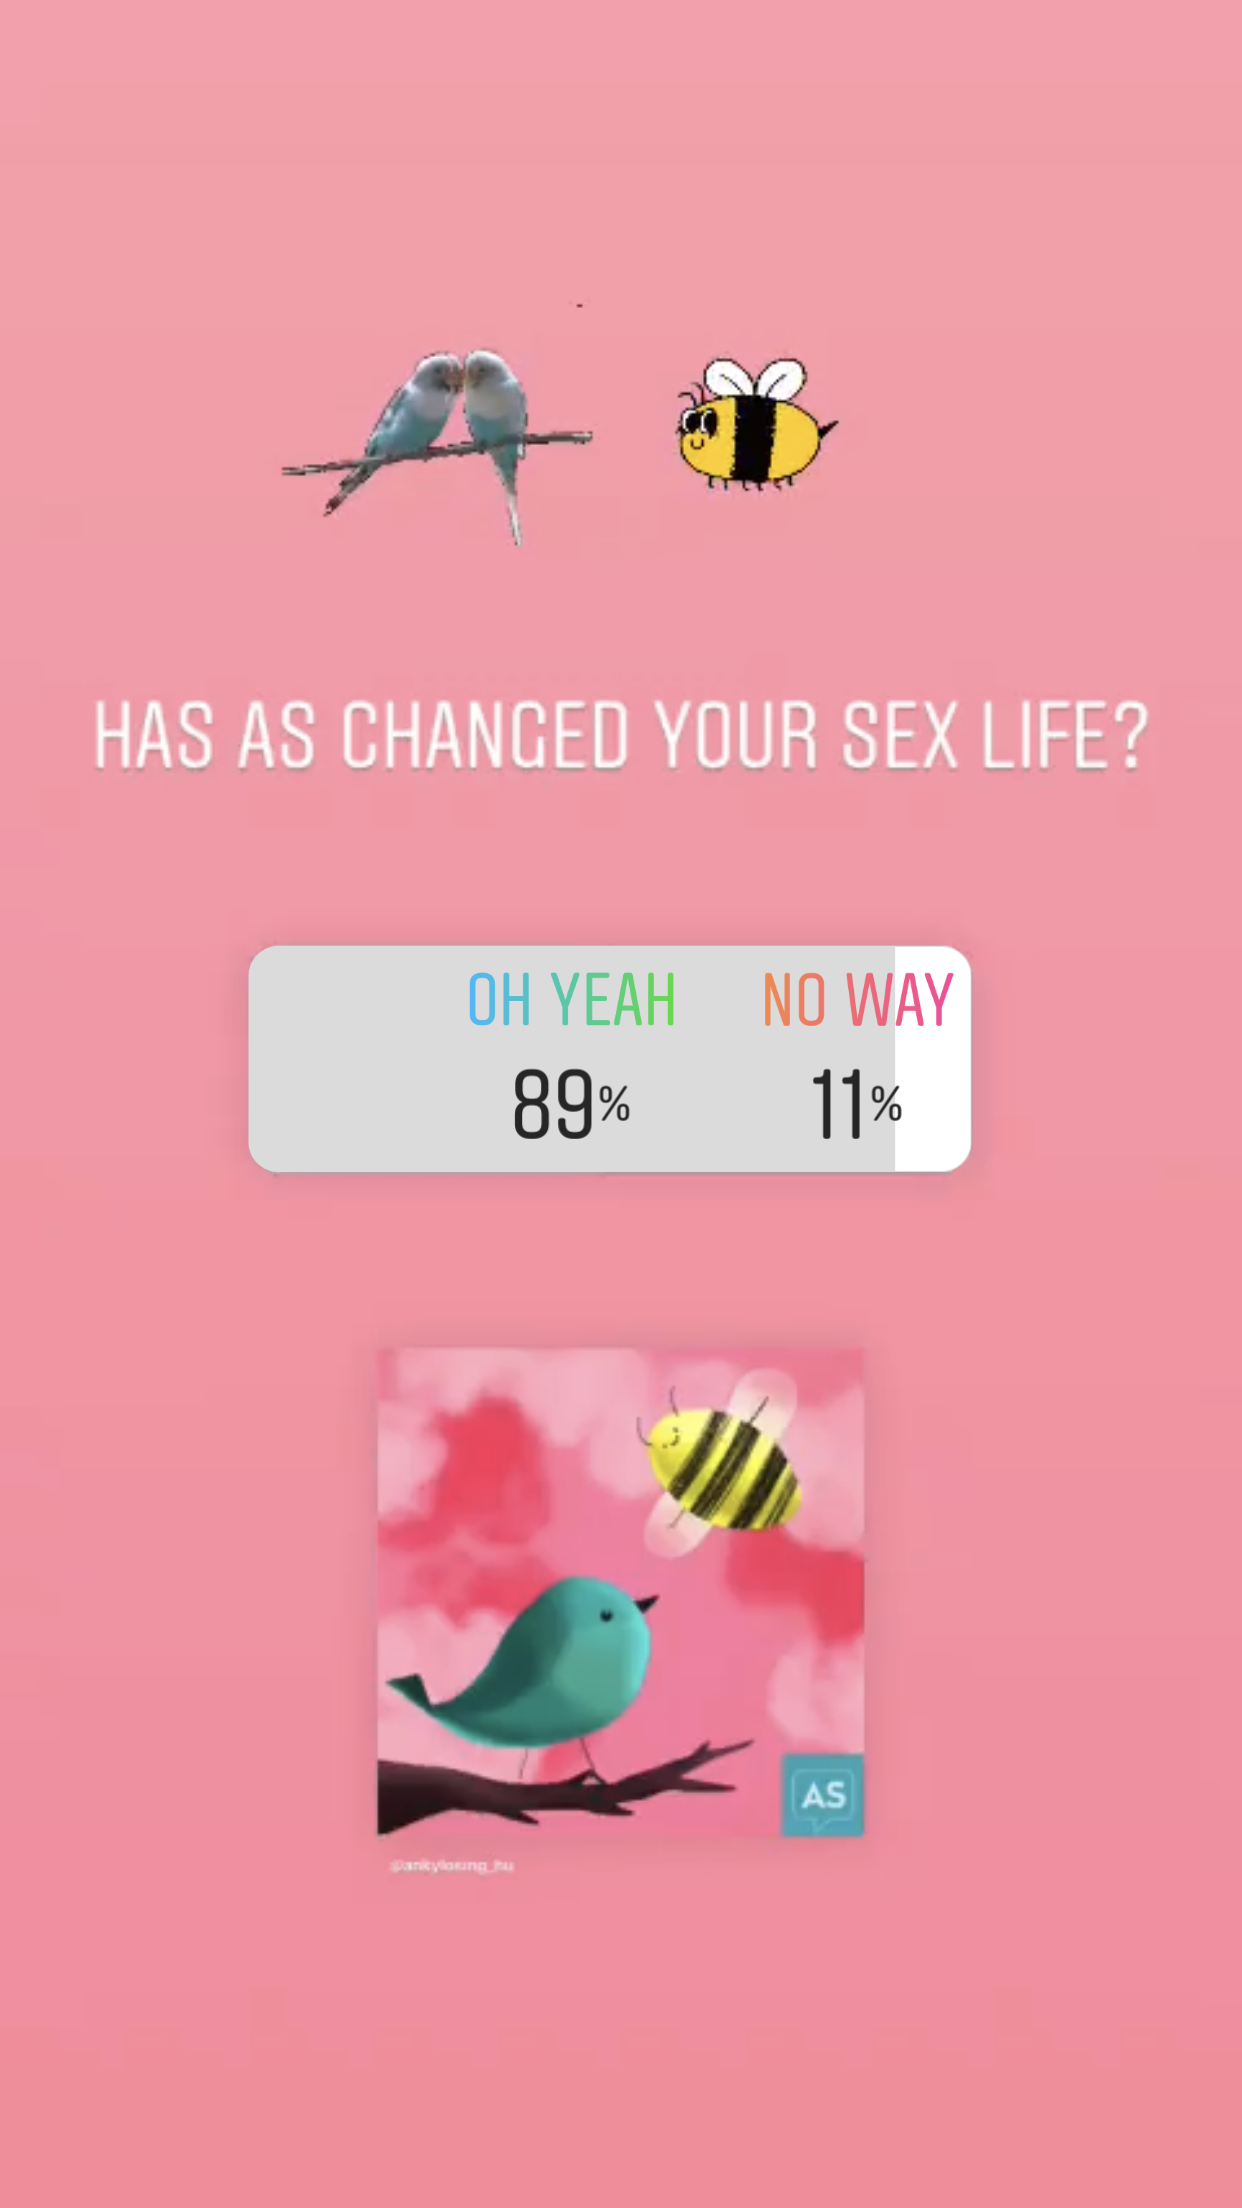 89 percent of people say AS has affected their sex life